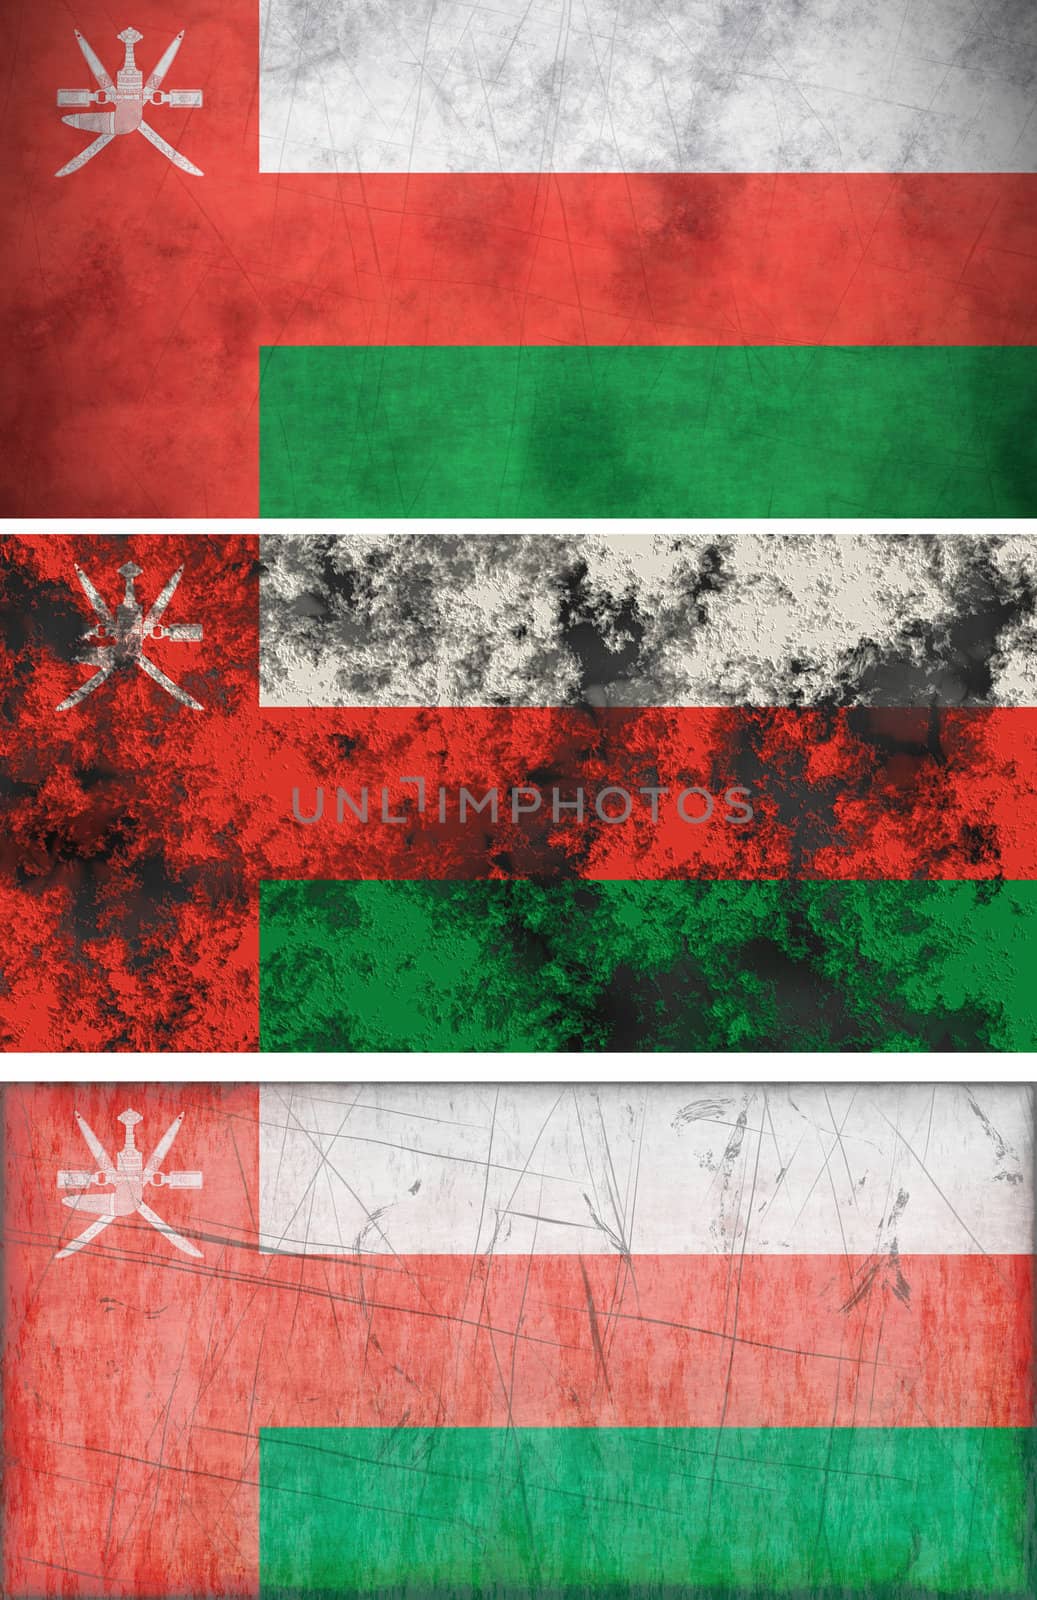 Great Image of the Flag of Oman